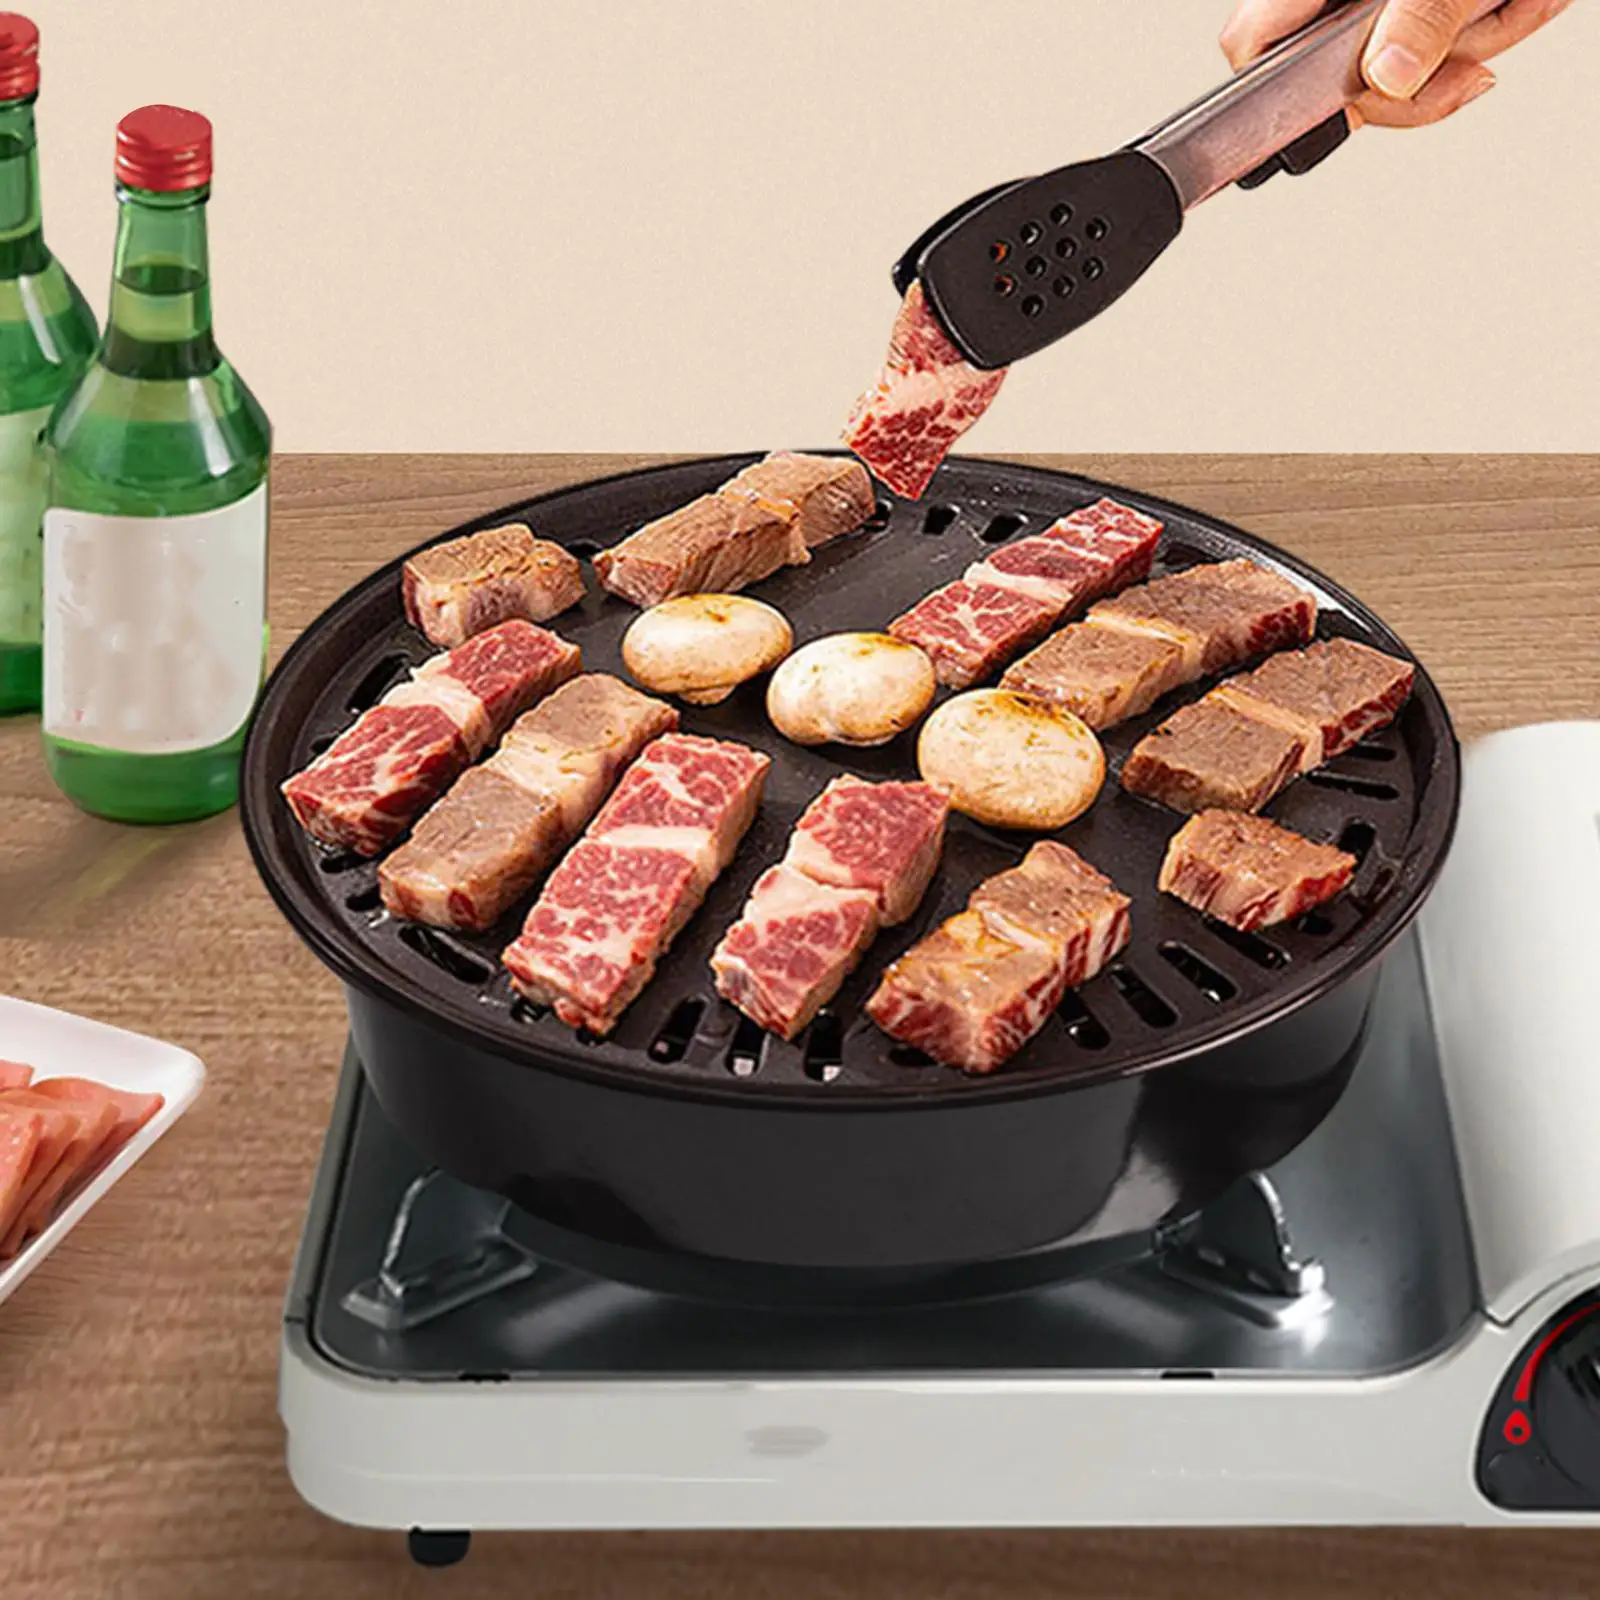 https://ae01.alicdn.com/kf/S1cf086522cf741a2b913a85b71b08c94V/Stovetop-Grill-Pan-Smokeless-BBQ-Grilling-Griddle-for-Chicken-Meat-Hiking.jpg